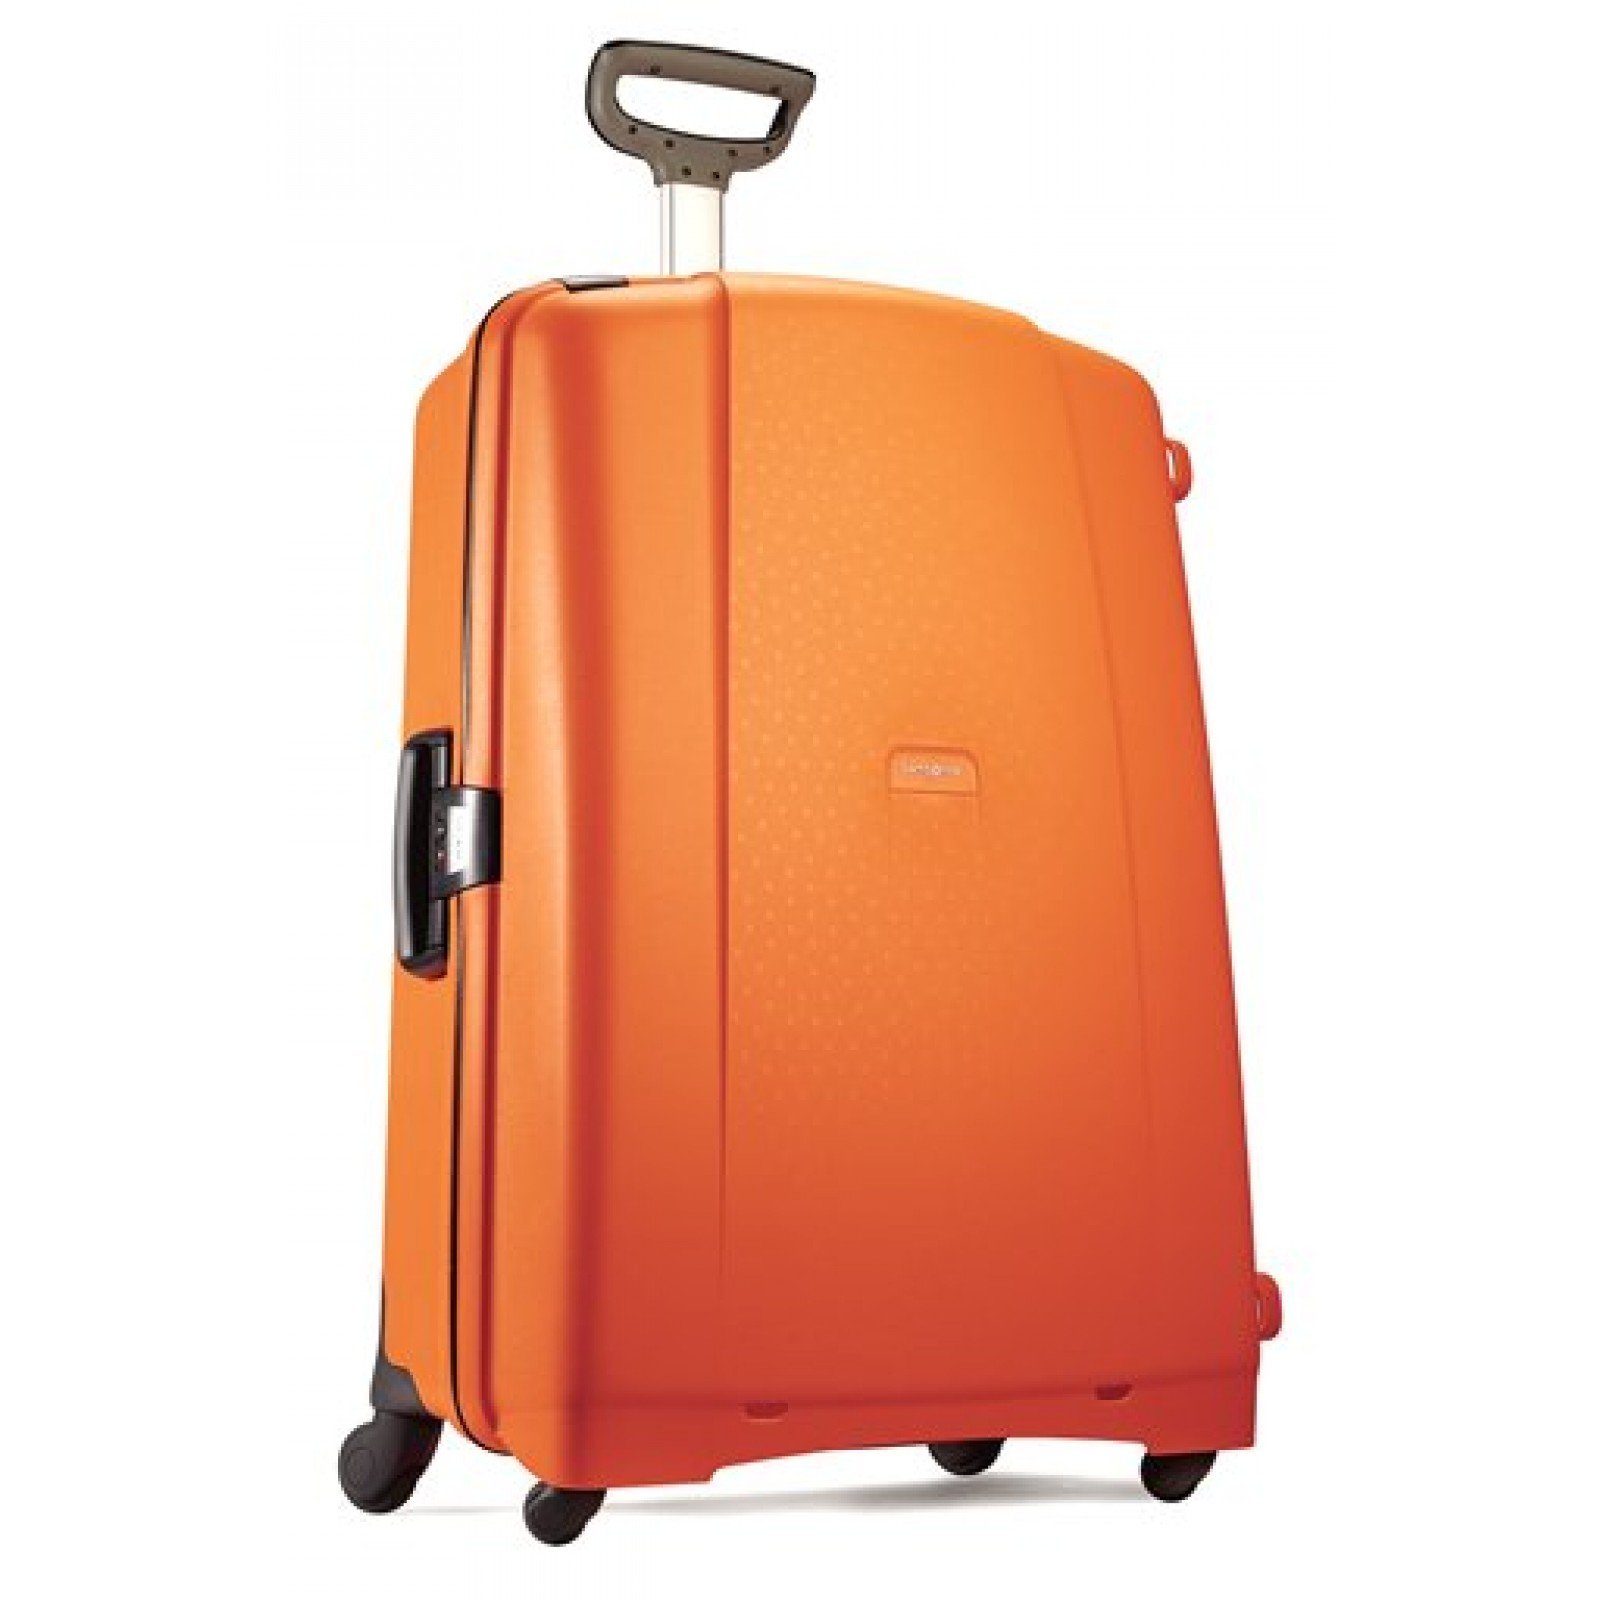 My parents have a size of luggages | Luggage, Luggage sizes, Samsonite